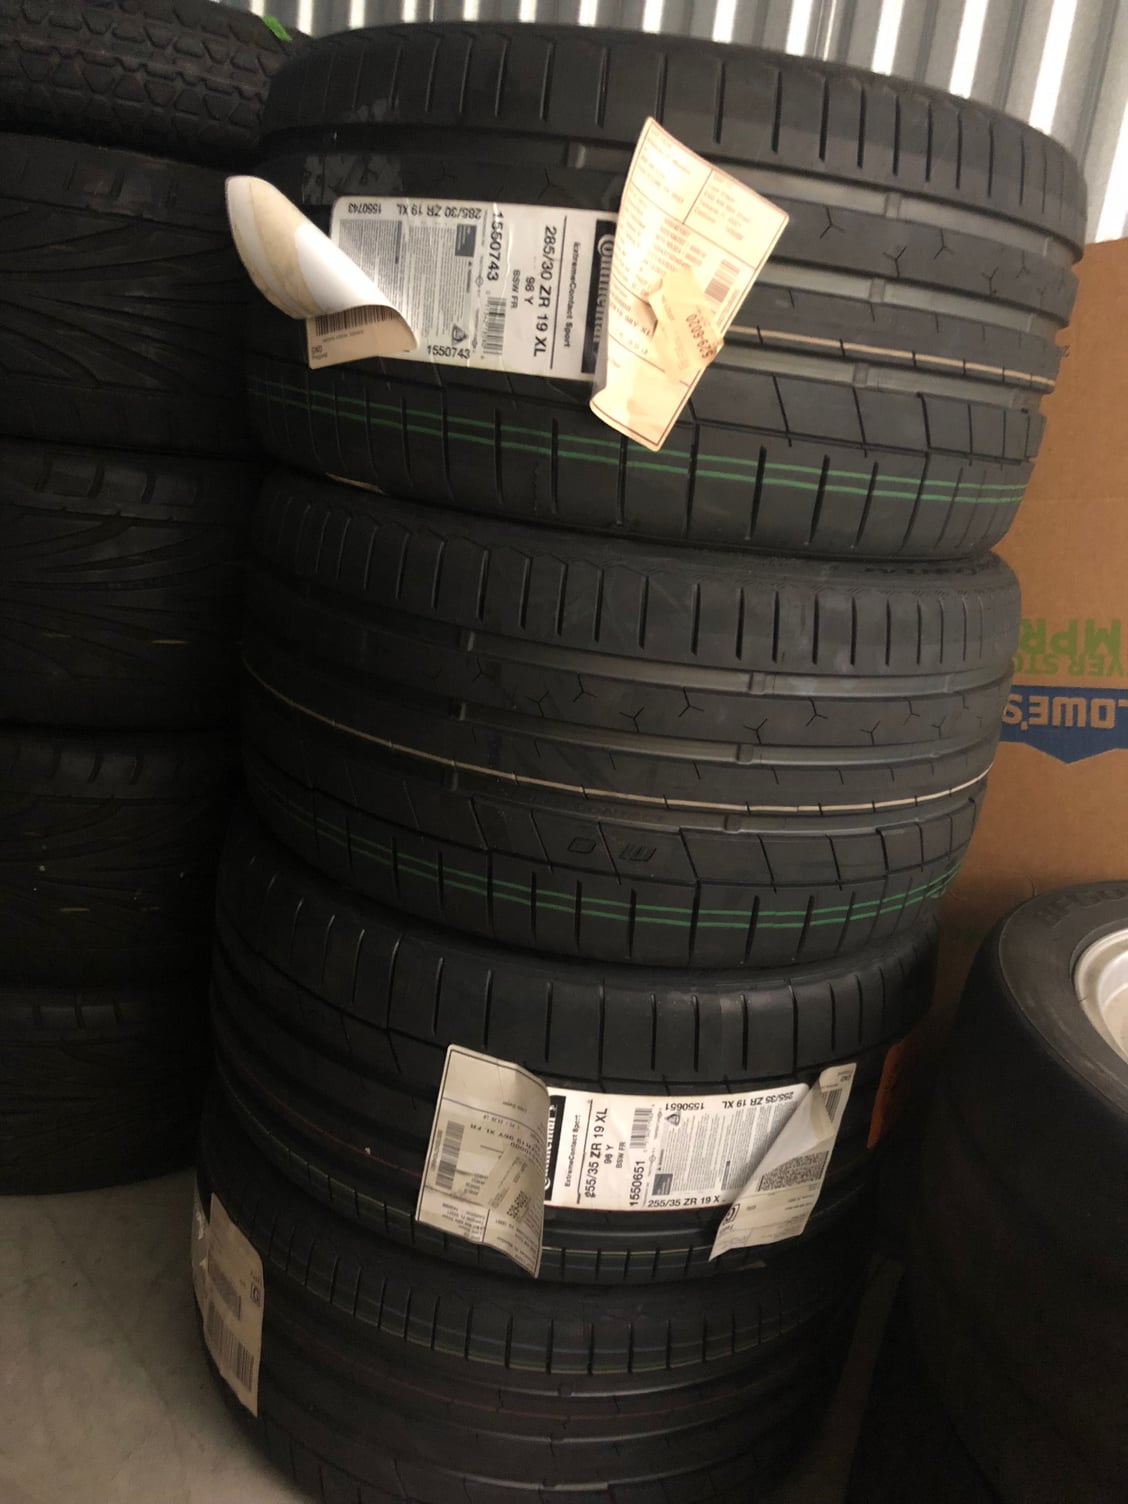 Wheels and Tires/Axles - *Brand New* Continental Extreme Sport Tires - New - 2014 to 2016 Mercedes-Benz E63 AMG S - Ft Lauderdale, FL 33331, United States